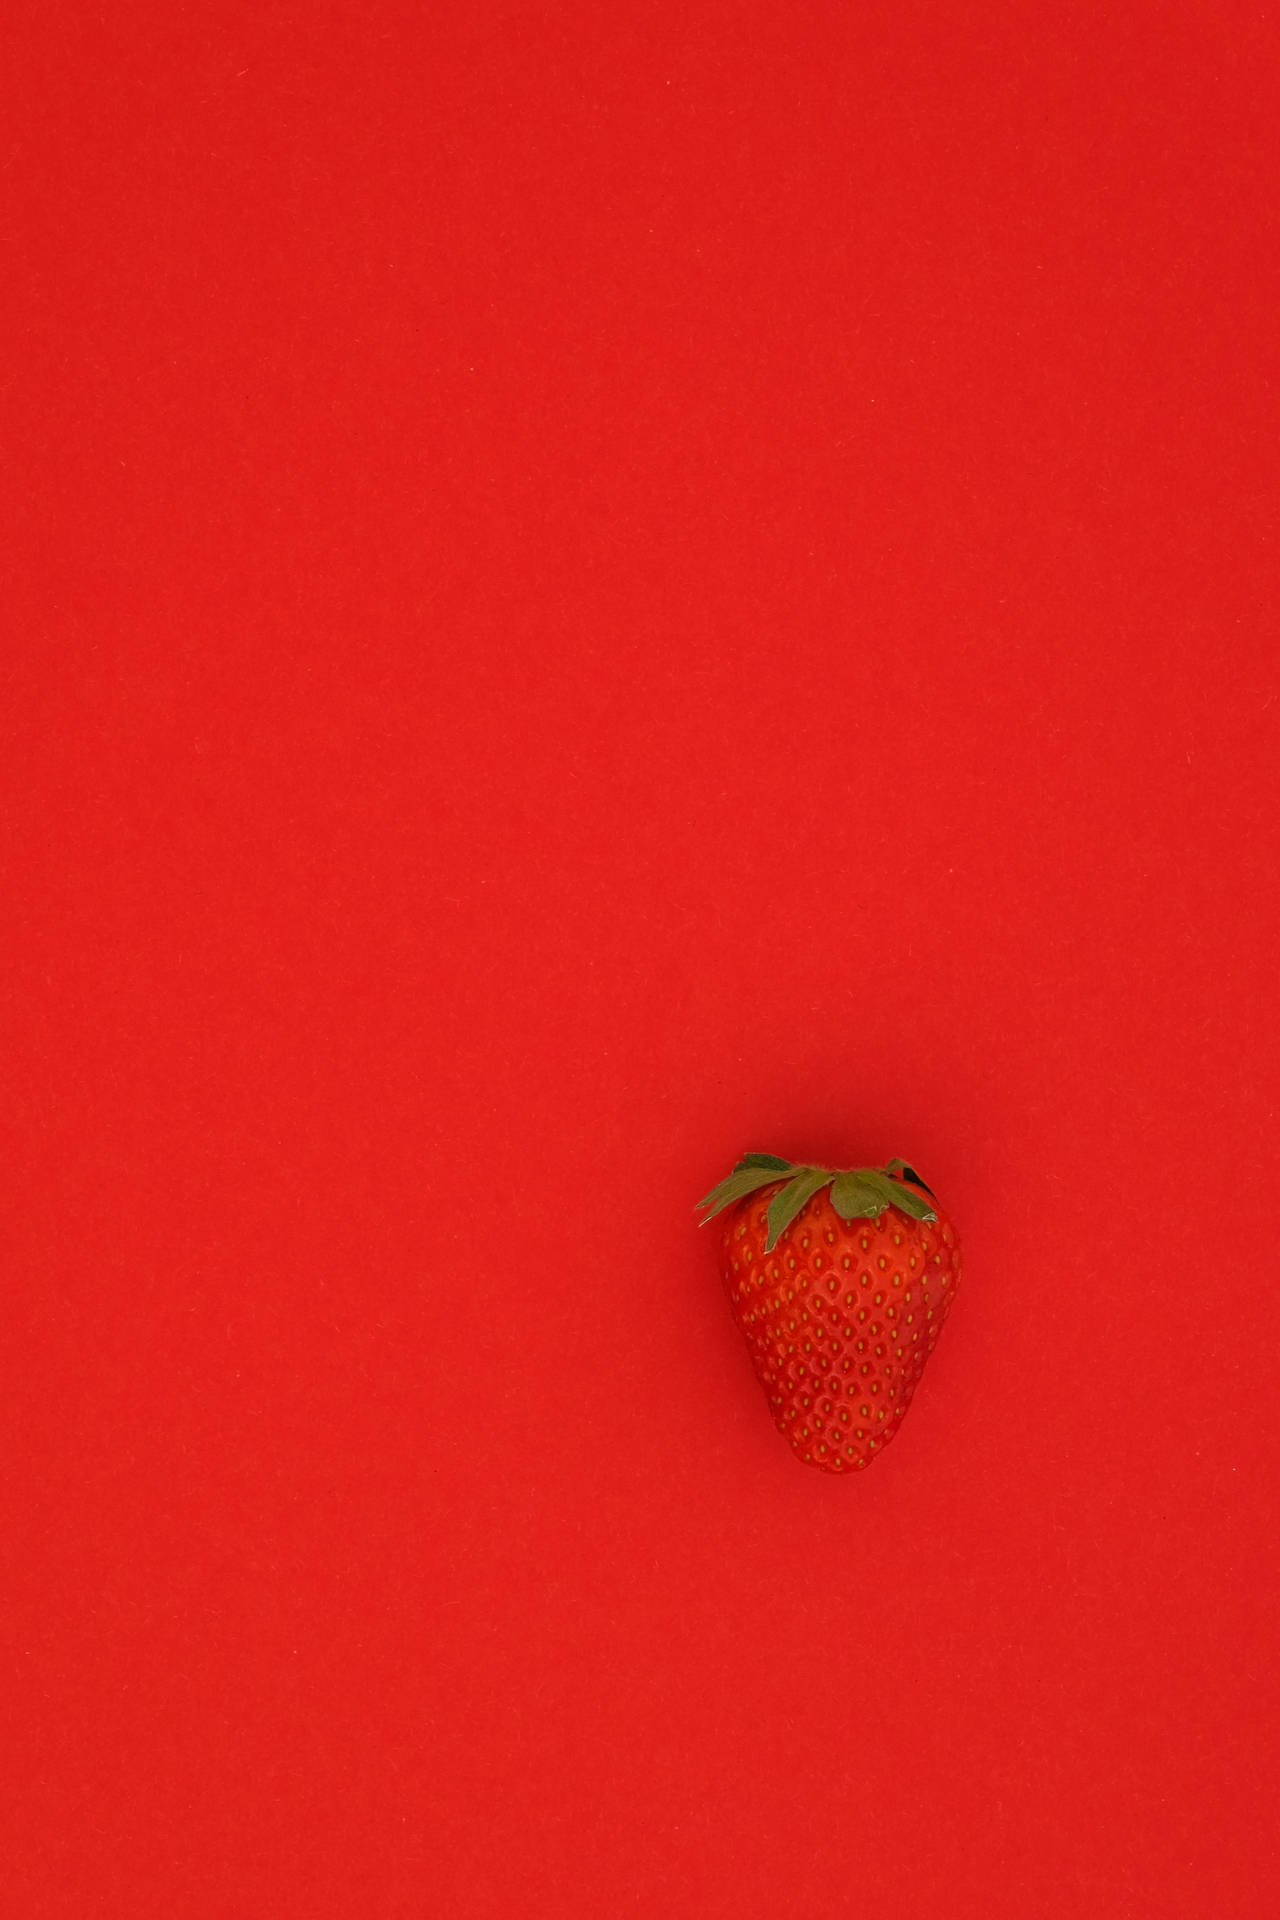 A delicious and juicy red strawberry. Wallpaper